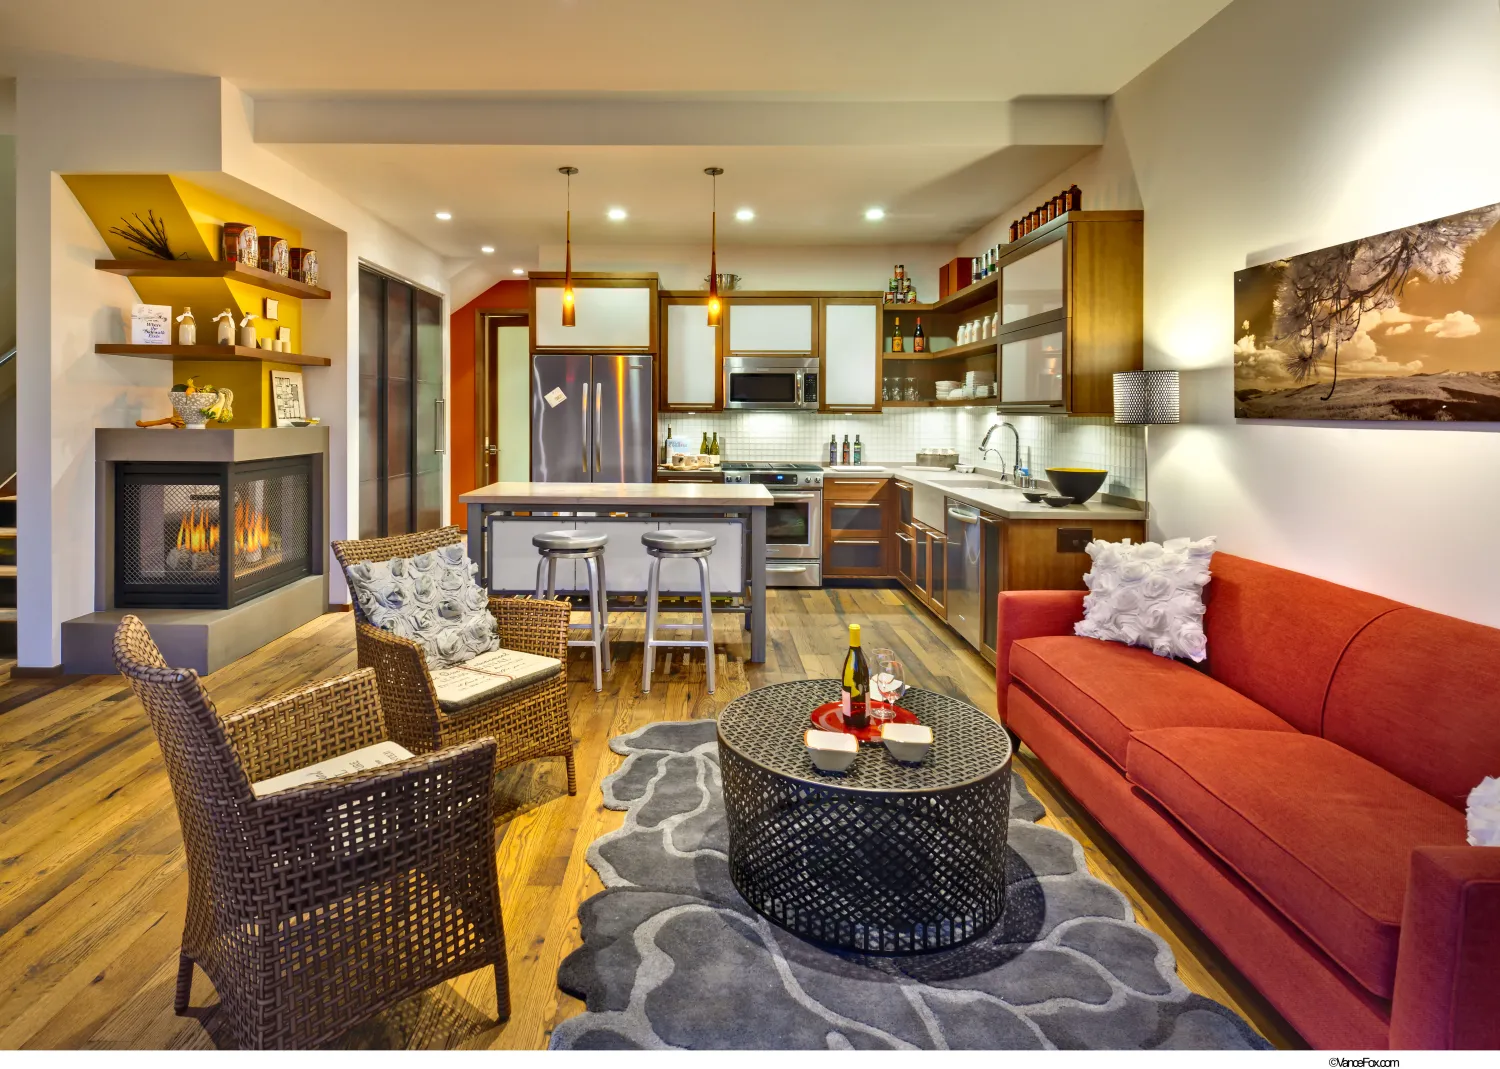 Interior view of living room and kitchen at Truckee Prototype Mixed-Use Townhouse in Truckee, California.